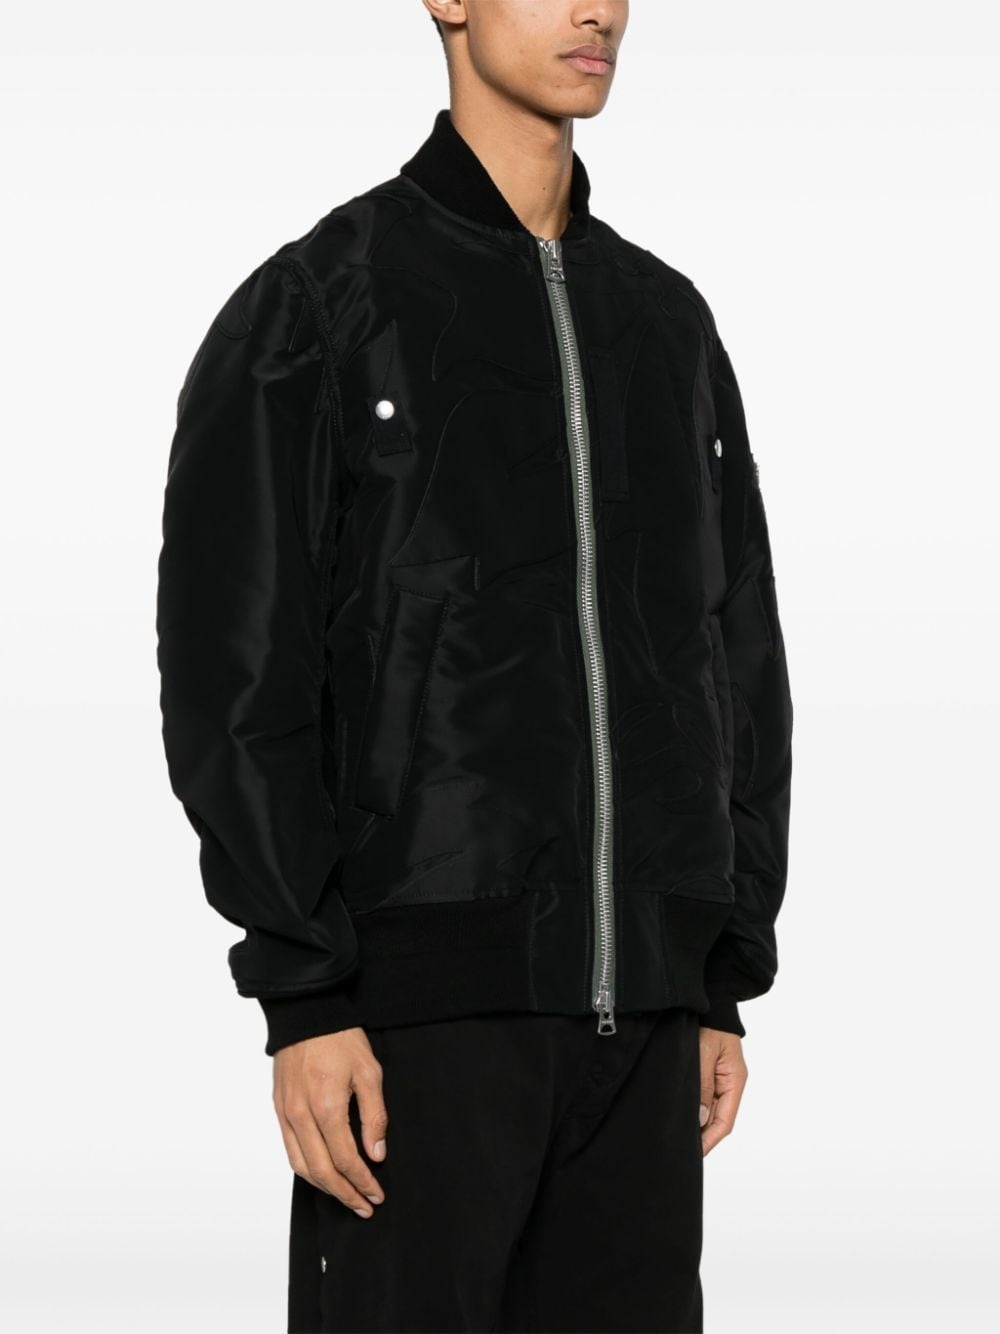 embroidered-patch bomber jacket - 3